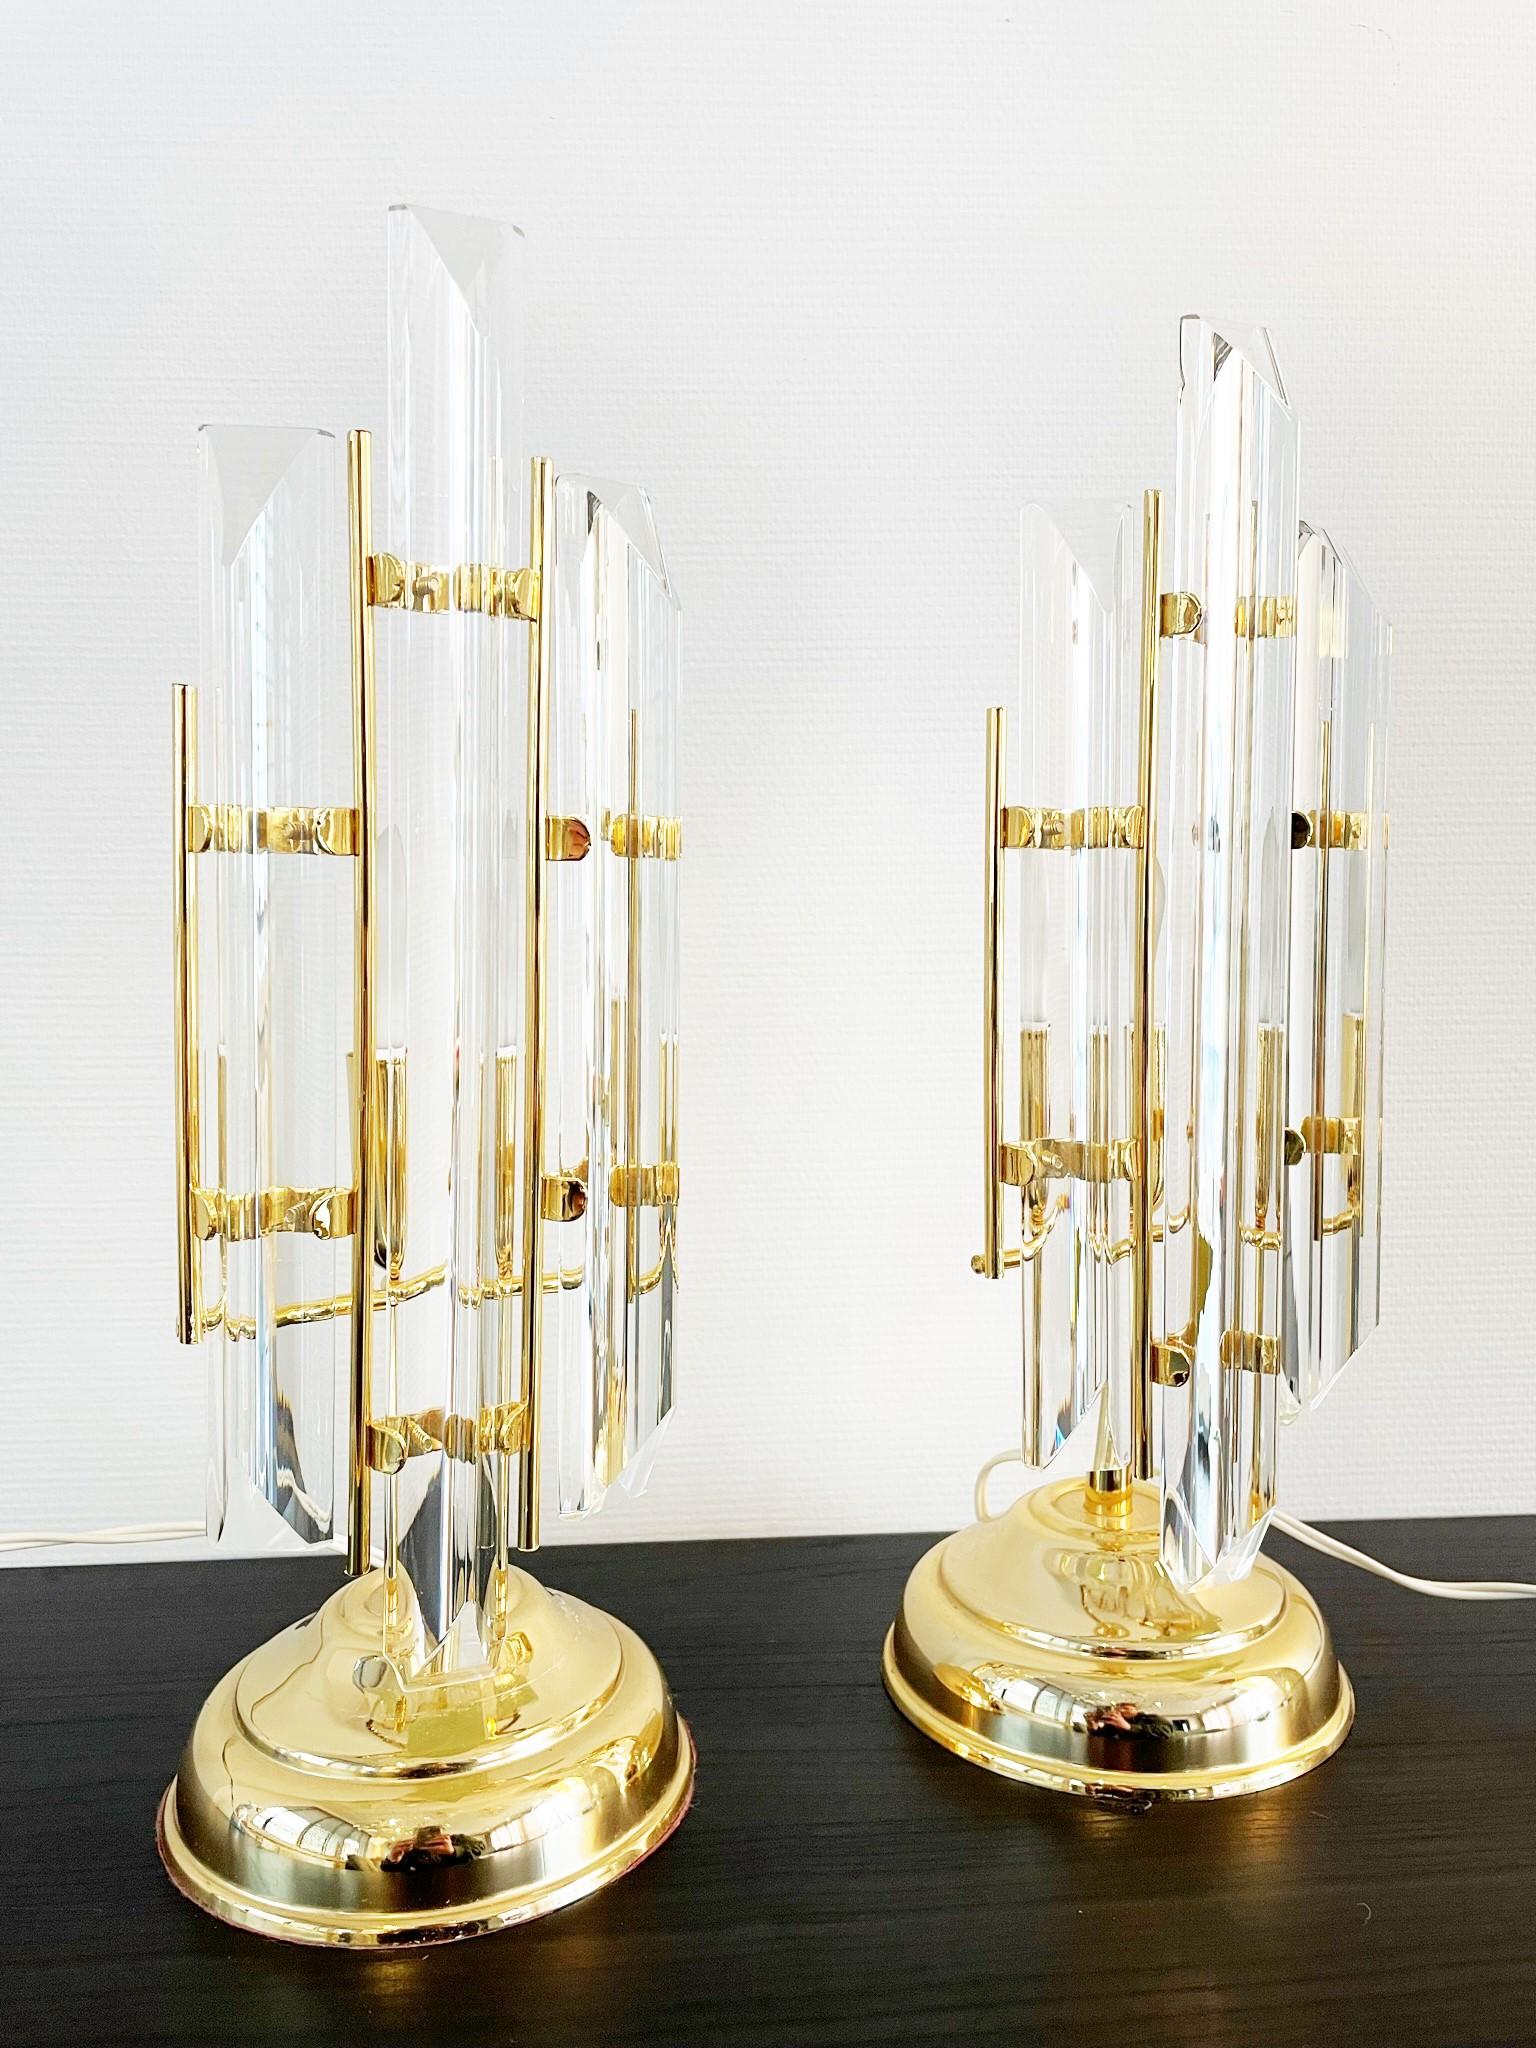 Pair of glass and brass 'triedri' table lamp by Paolo Venini.

The lamps emit a beautiful light.

Tested and ready to use with a regular e14 light bulb.

1970s - Italy

Dimensions:
Height: 37cm/14.56